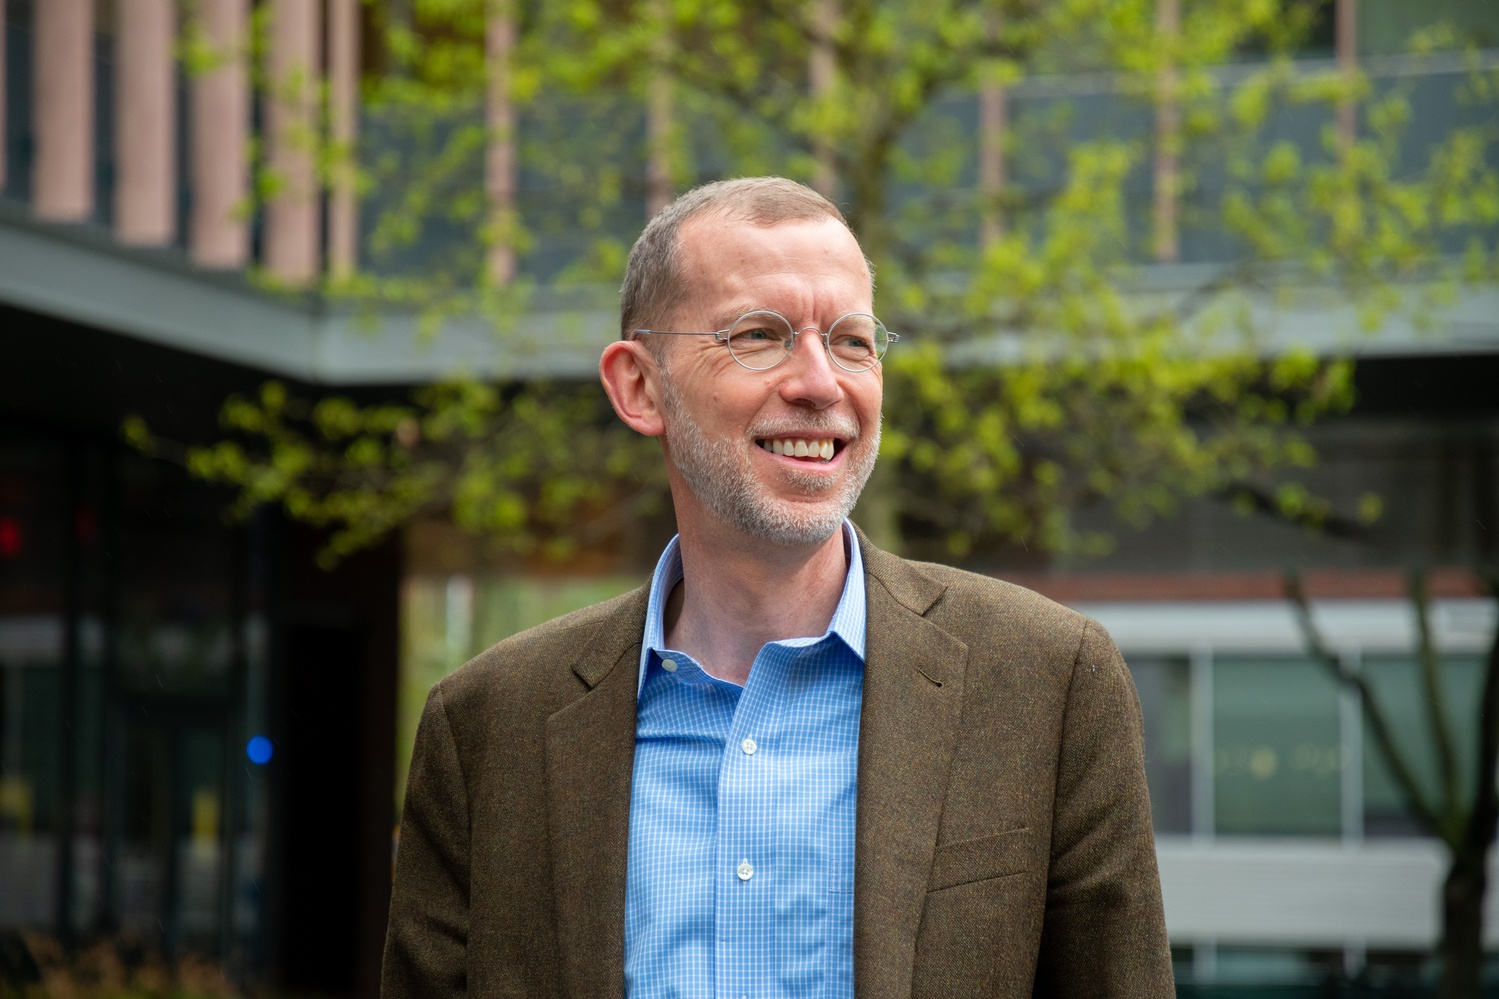 Elmendorf has come under fire for a number of decisions, including allegedly blocking fellowship over the recipient's criticisms of Israel and considering a merger of HKS' Master in Public Policy and Master in Public Administration programs.